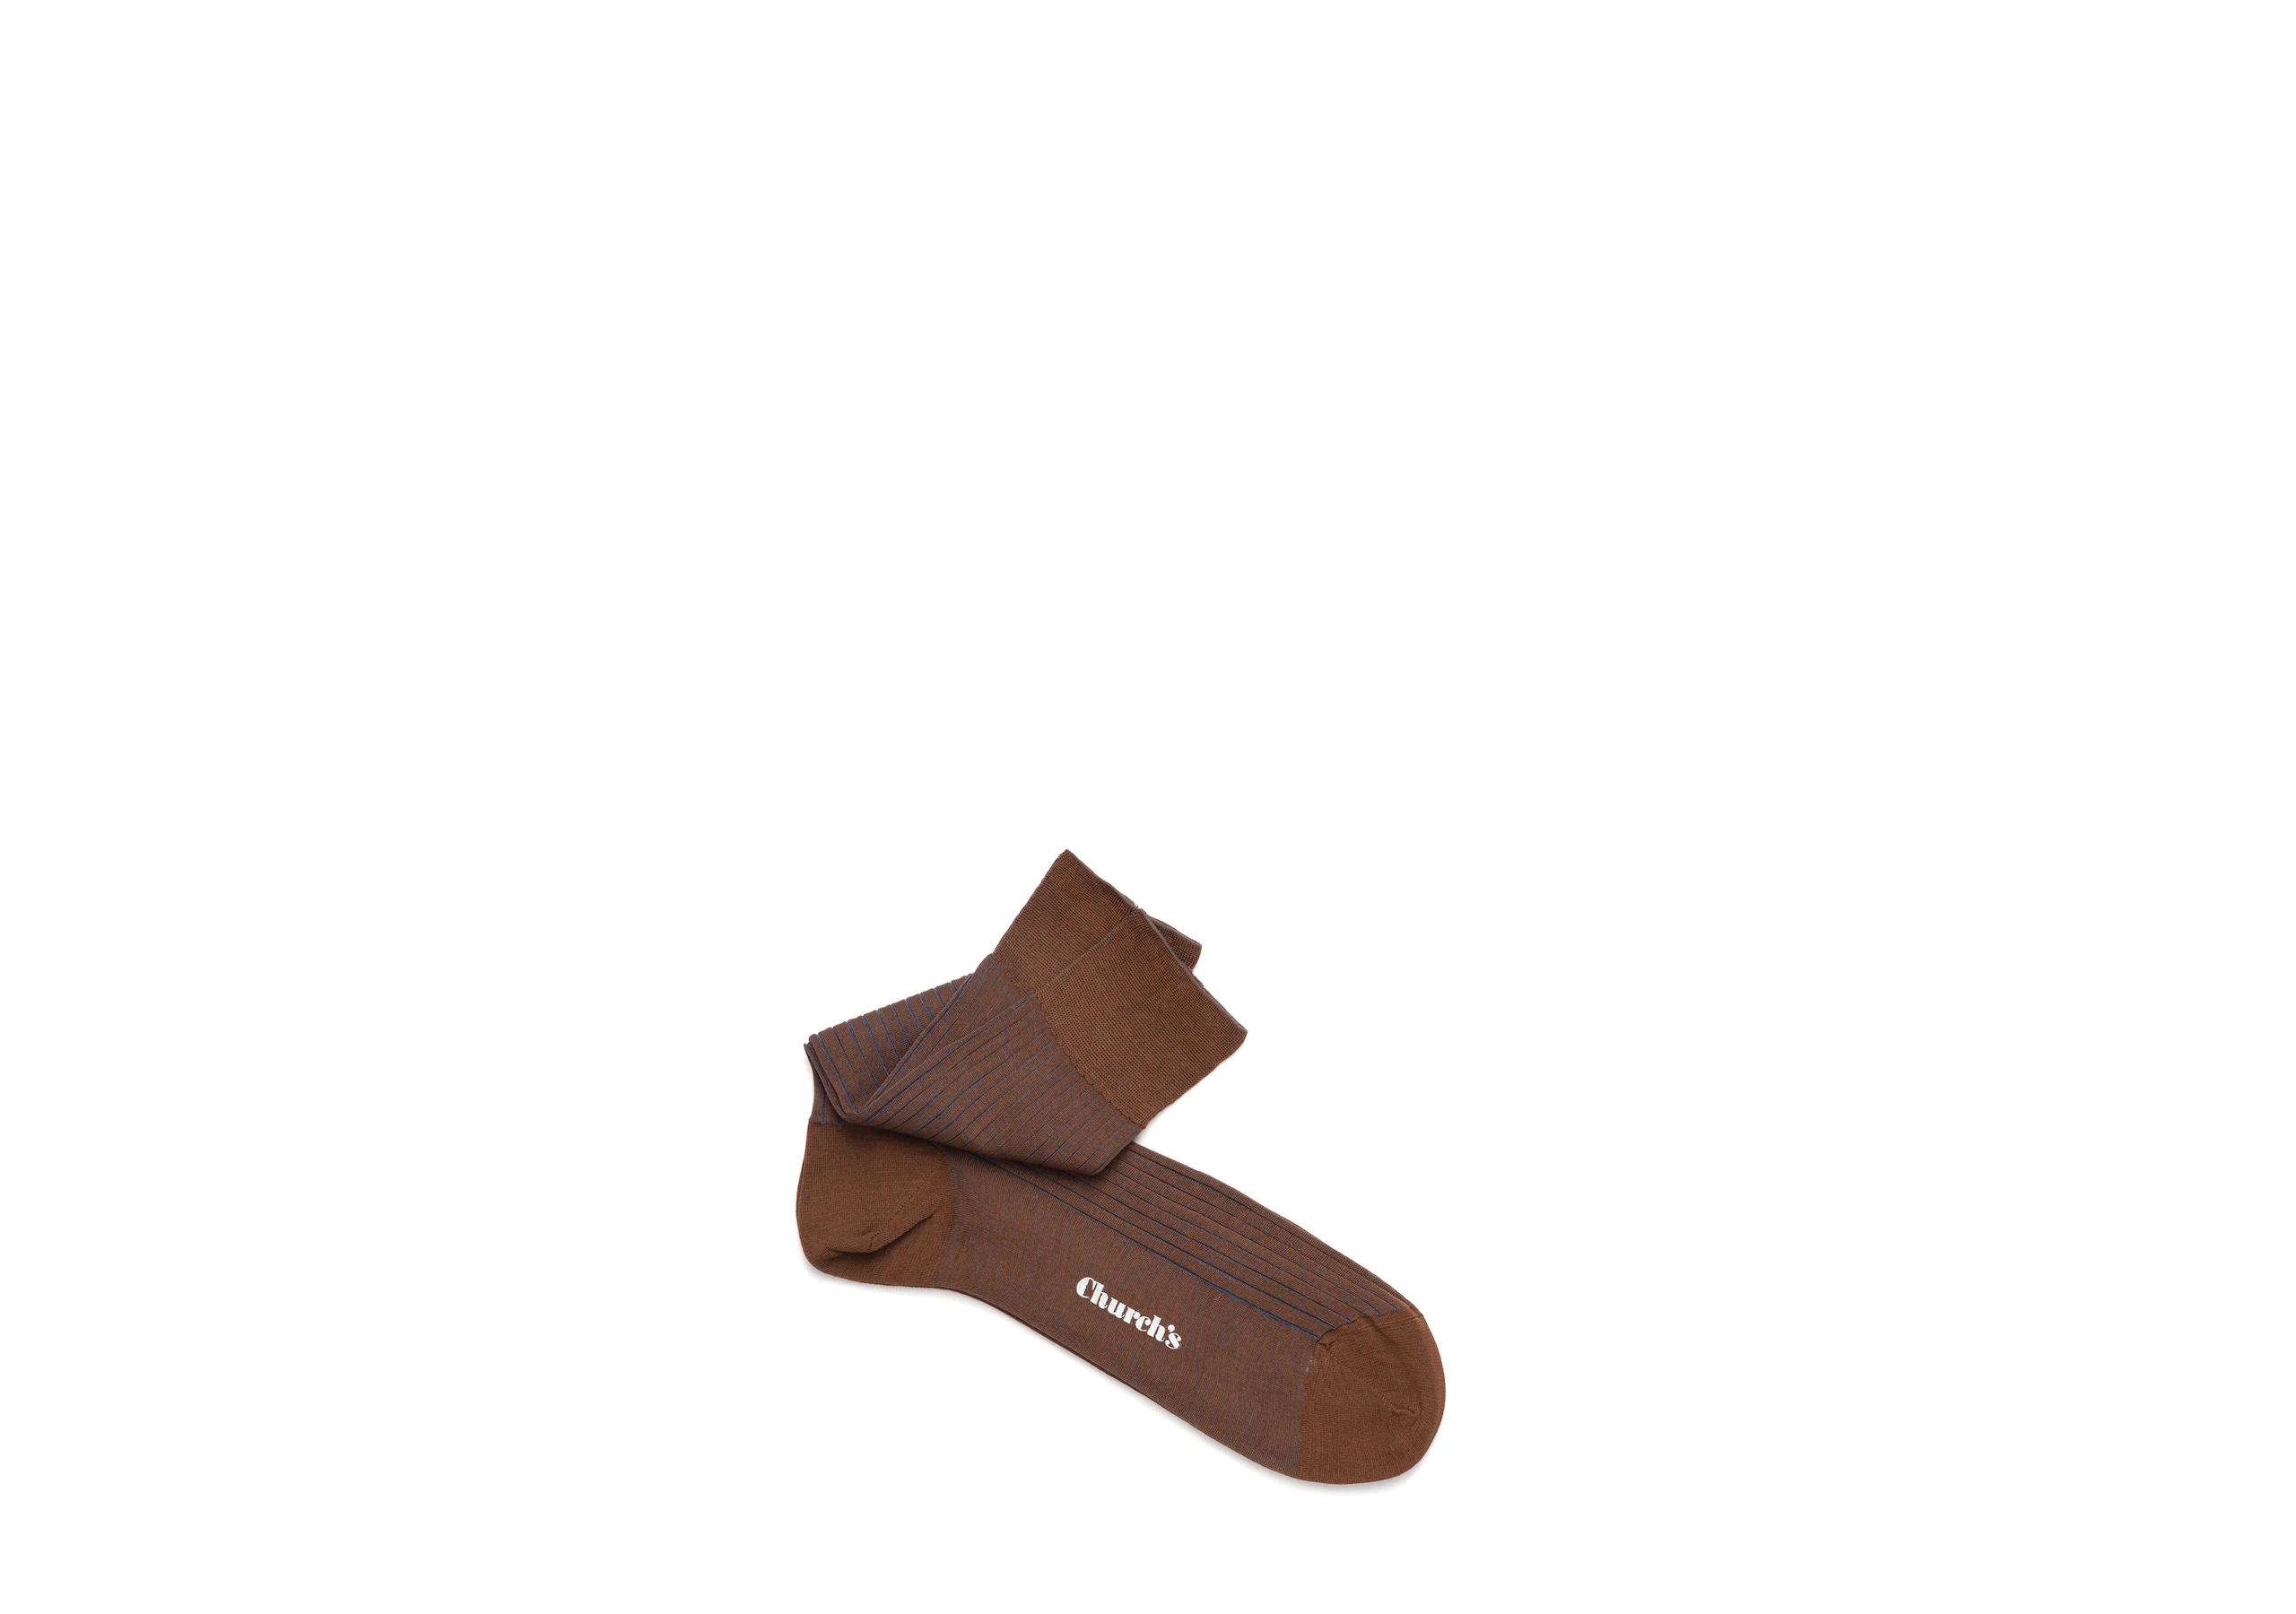 Contrast ribbed socks
Cotton Ribbed Short Brown - 1